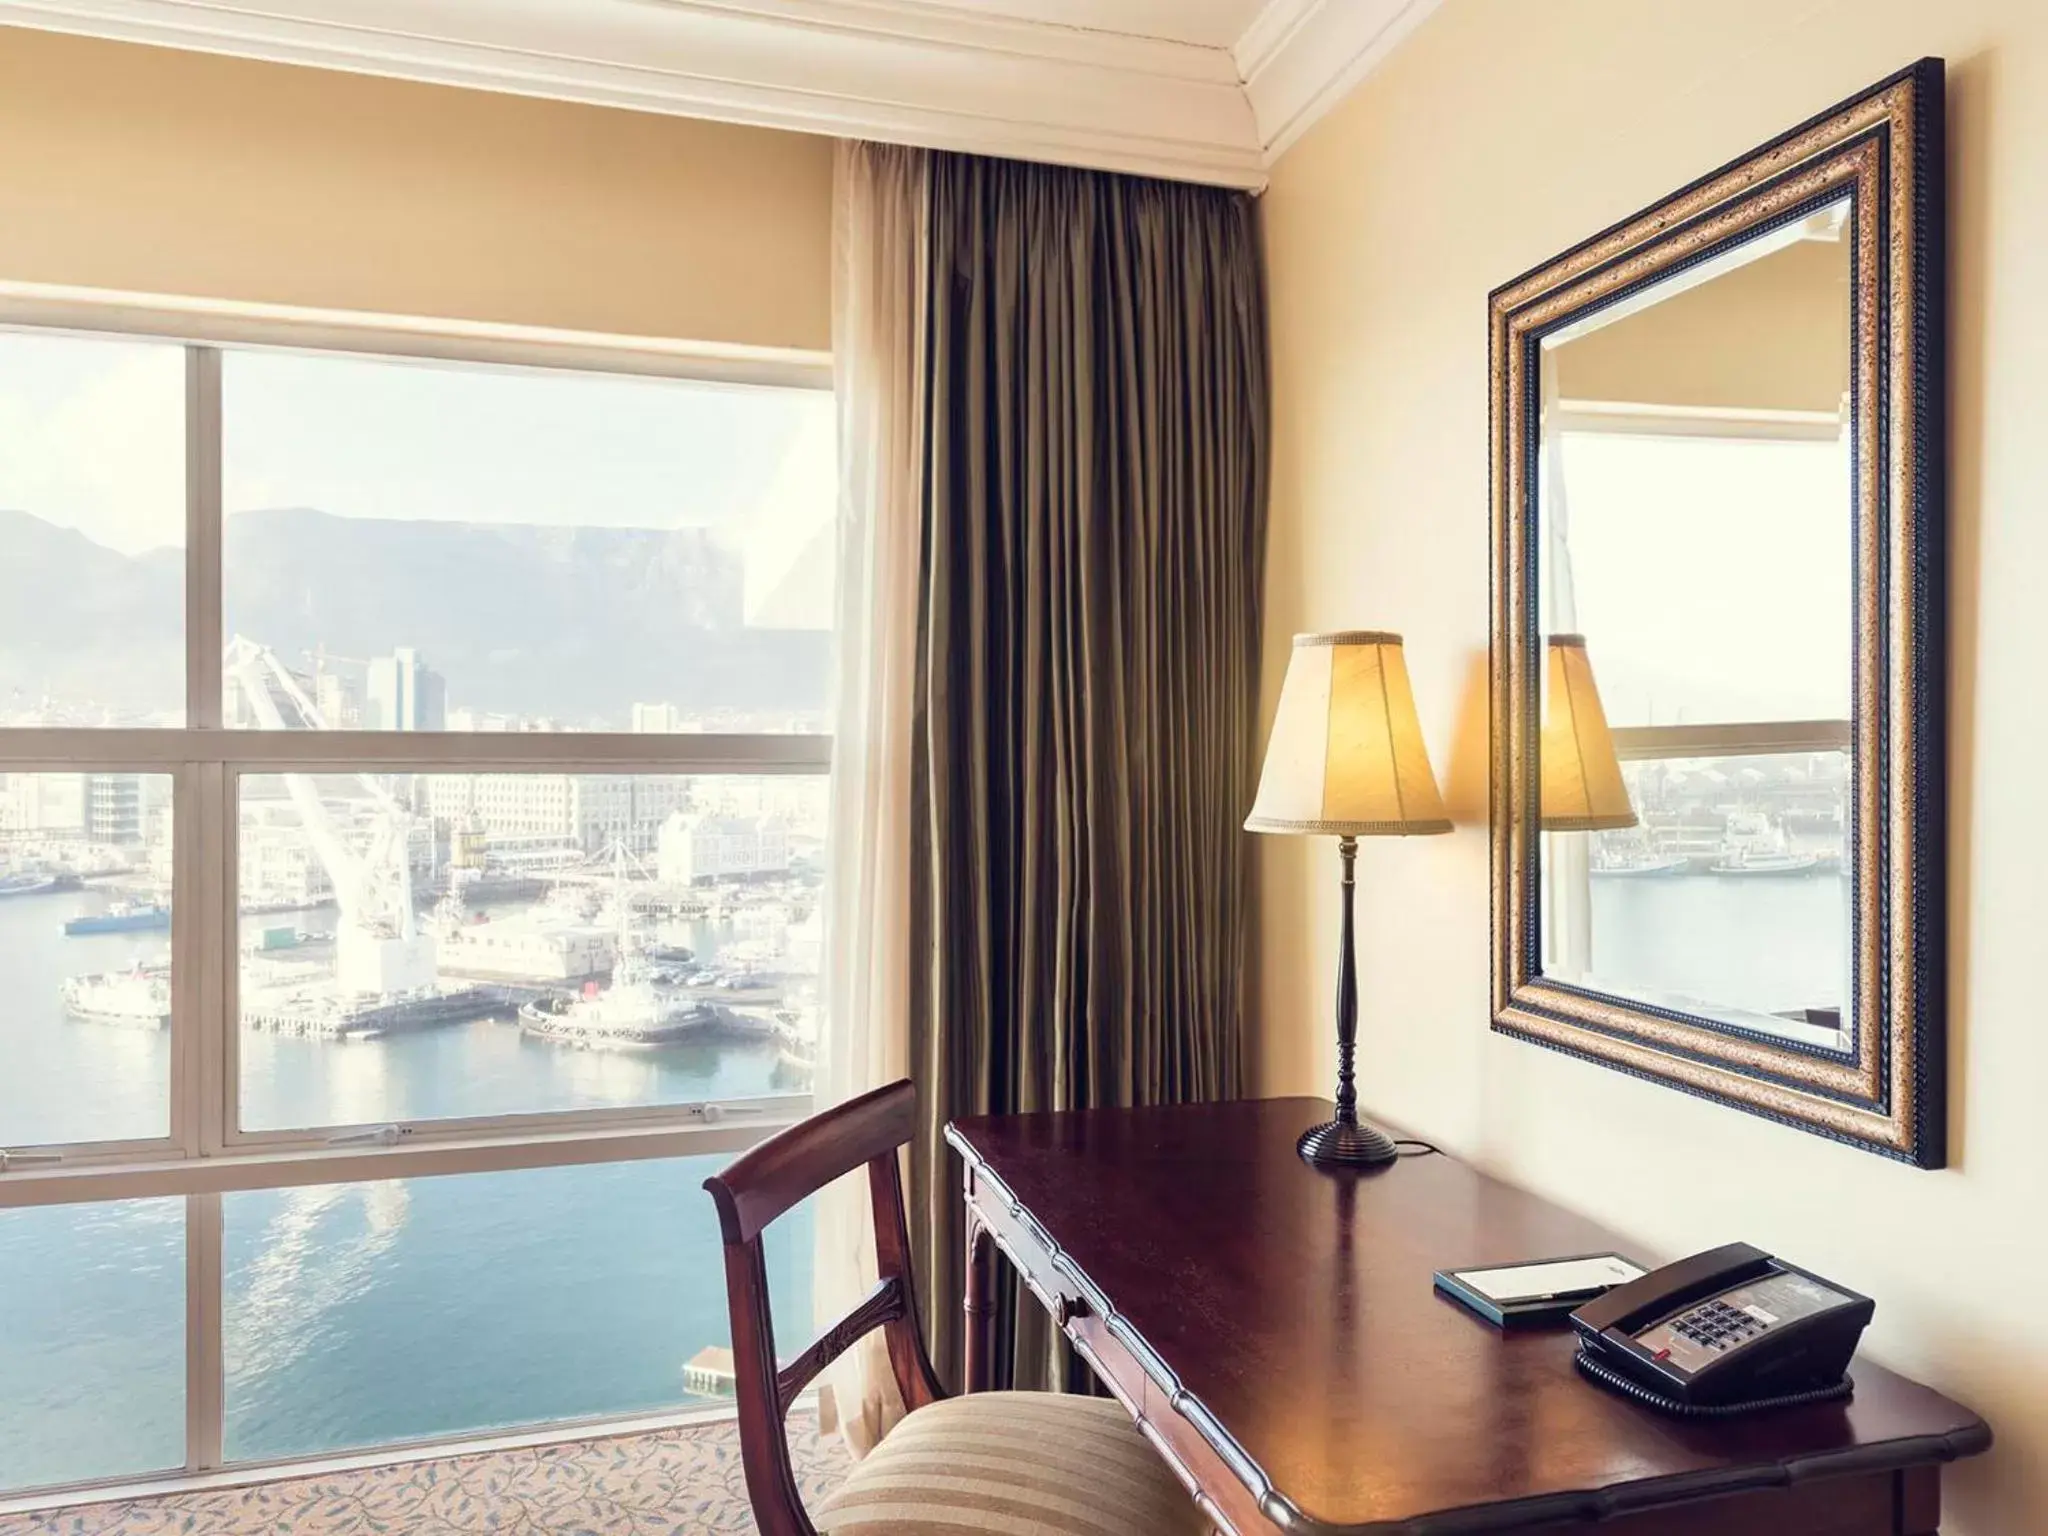 Superior Luxury Family Mountain Room - single occupancy in The Table Bay Hotel